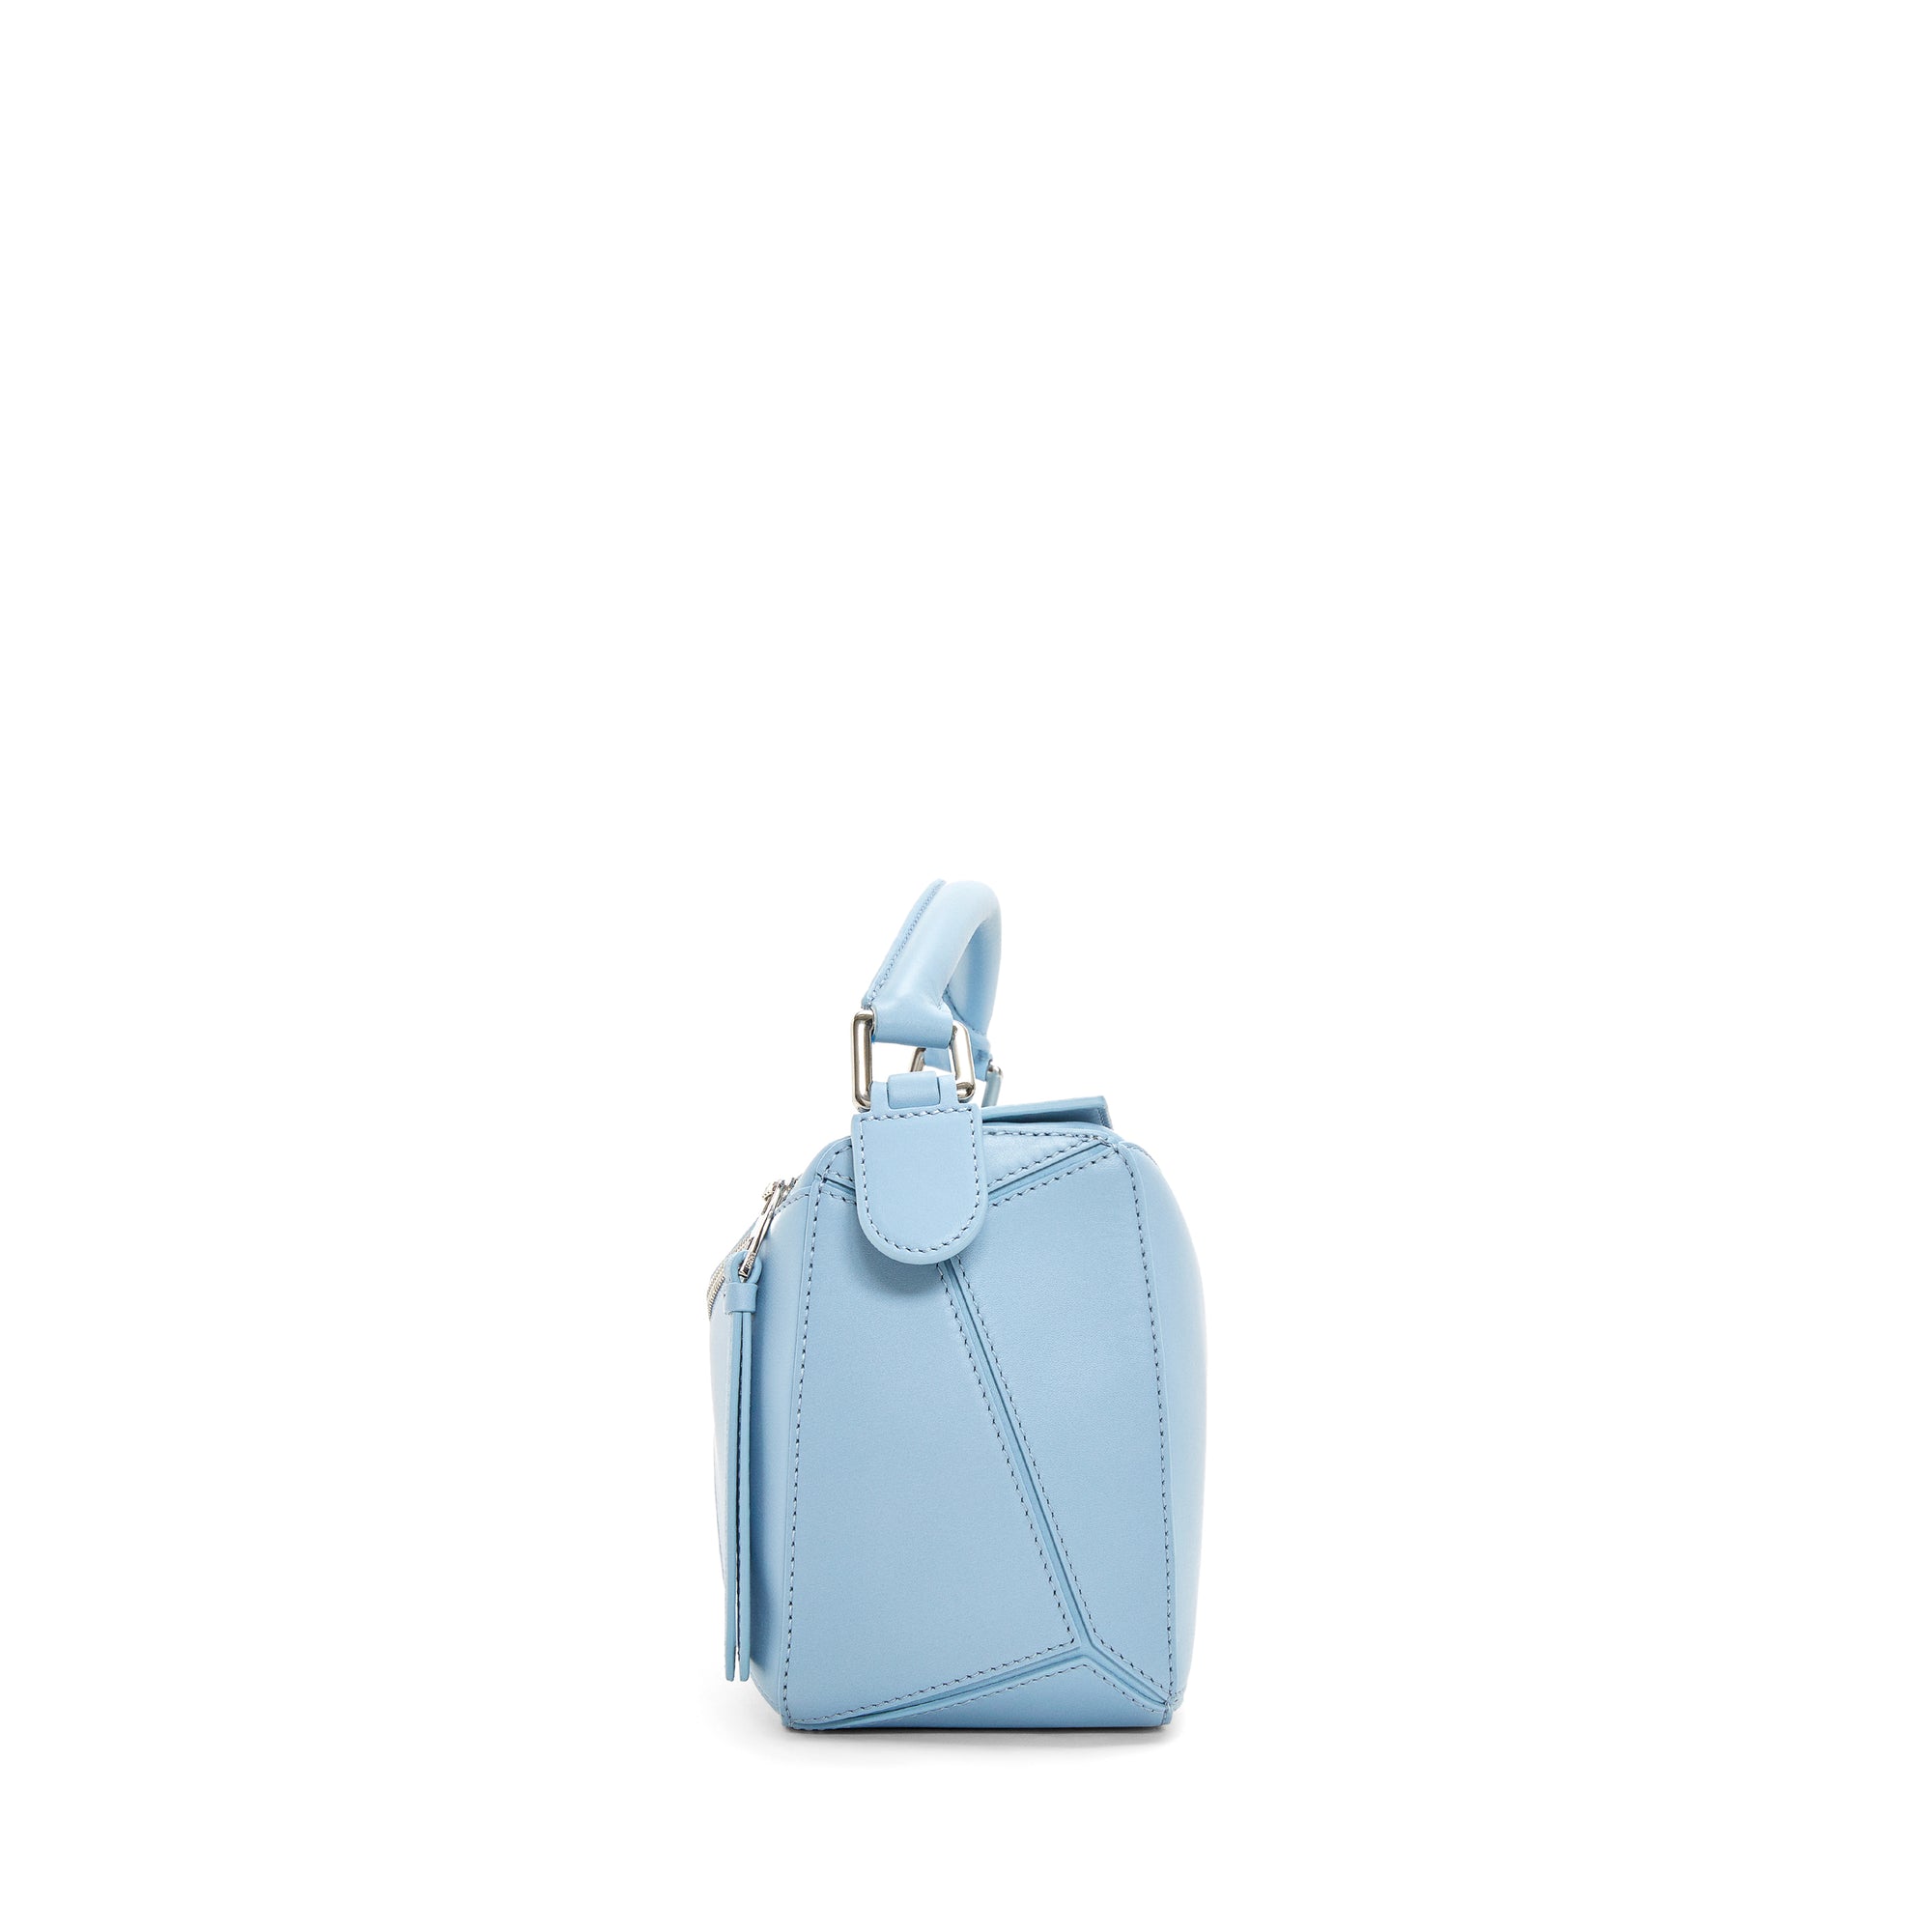 Loewe - Women’s Puzzle Small Bag - (Dusty Blue) view 6